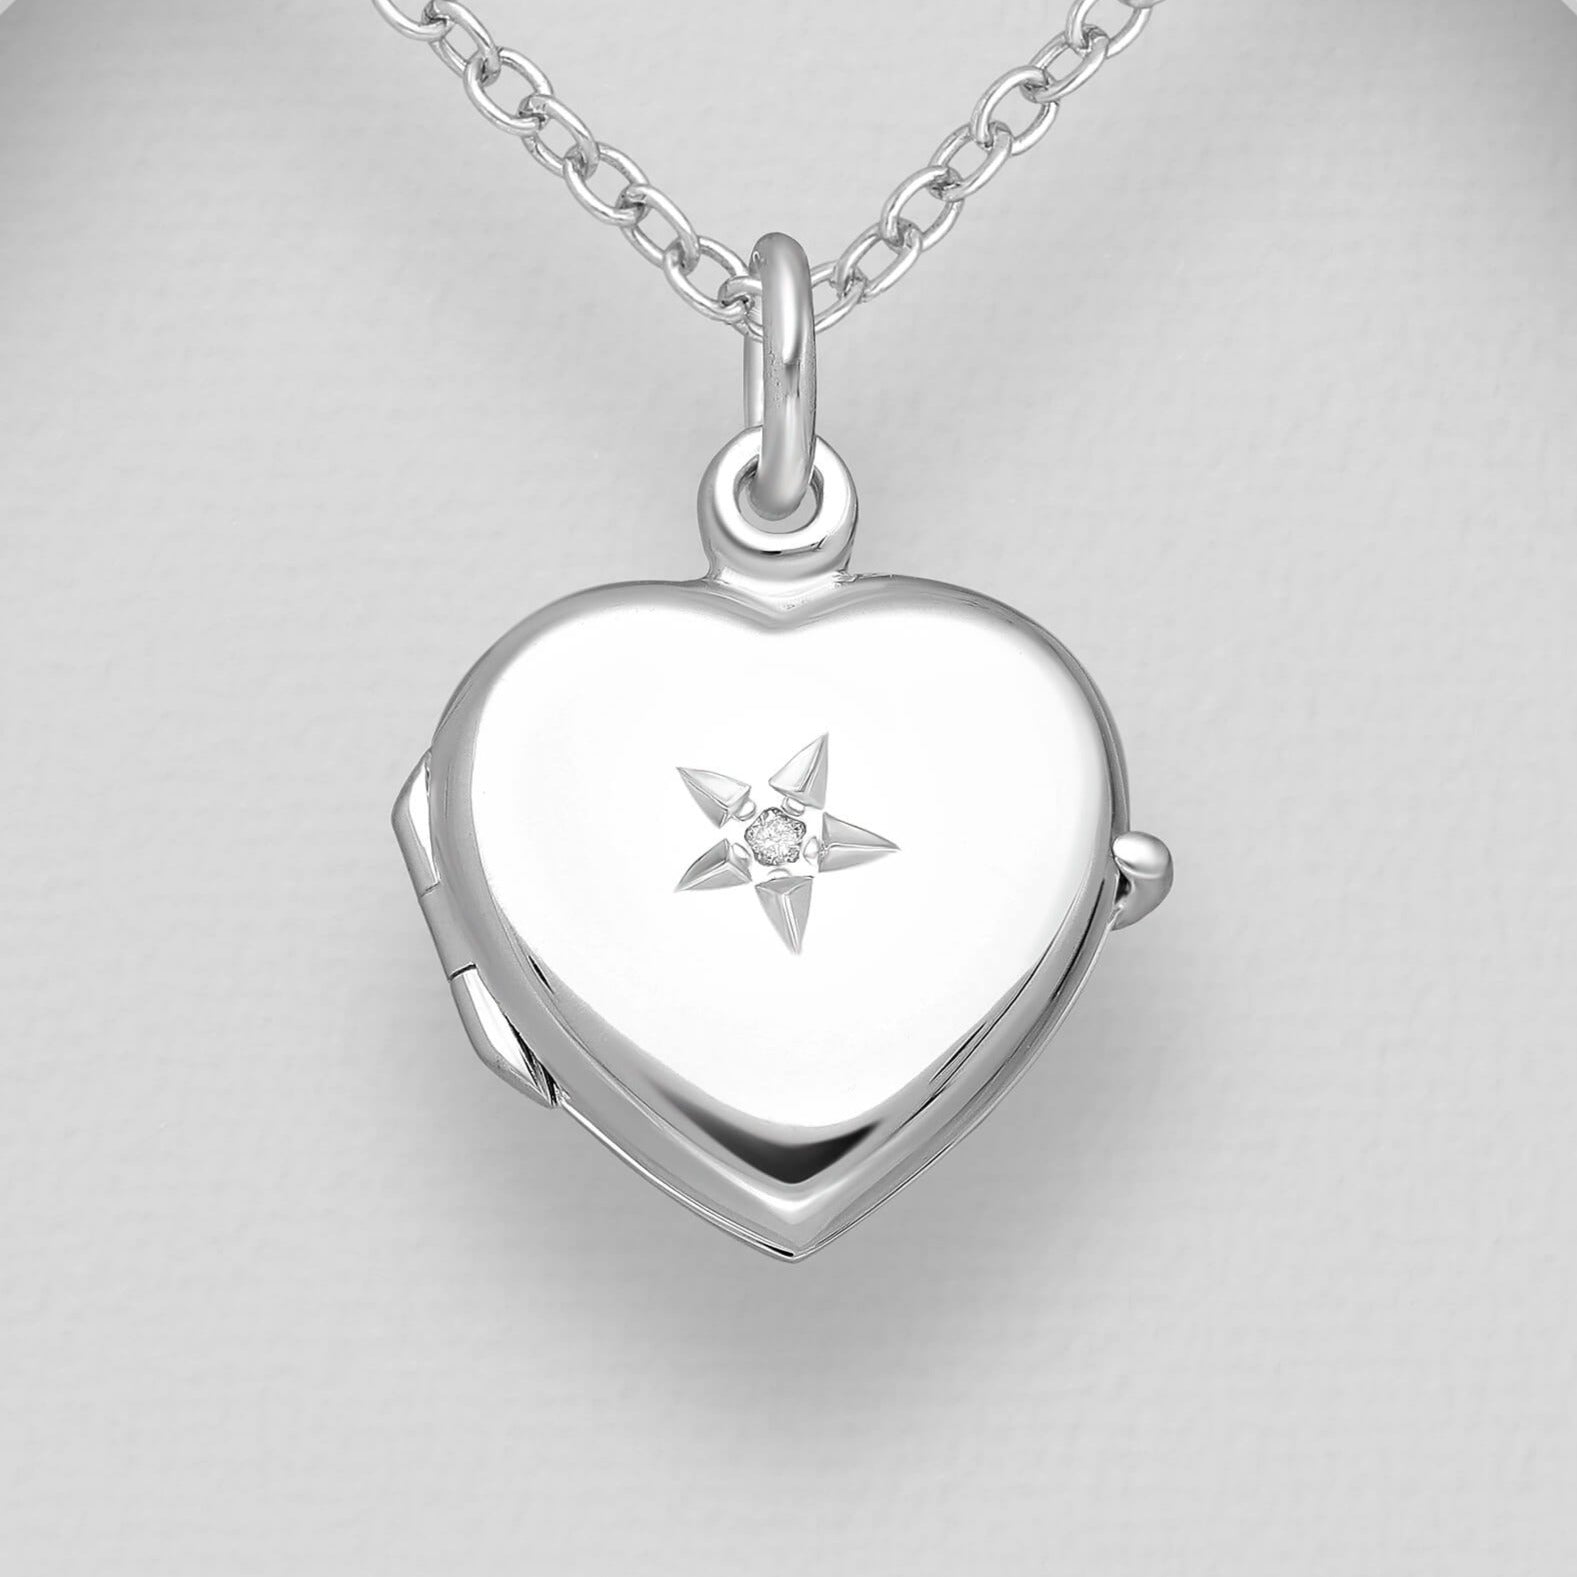 Heart shaped silver locket with star embellishment and white diamond